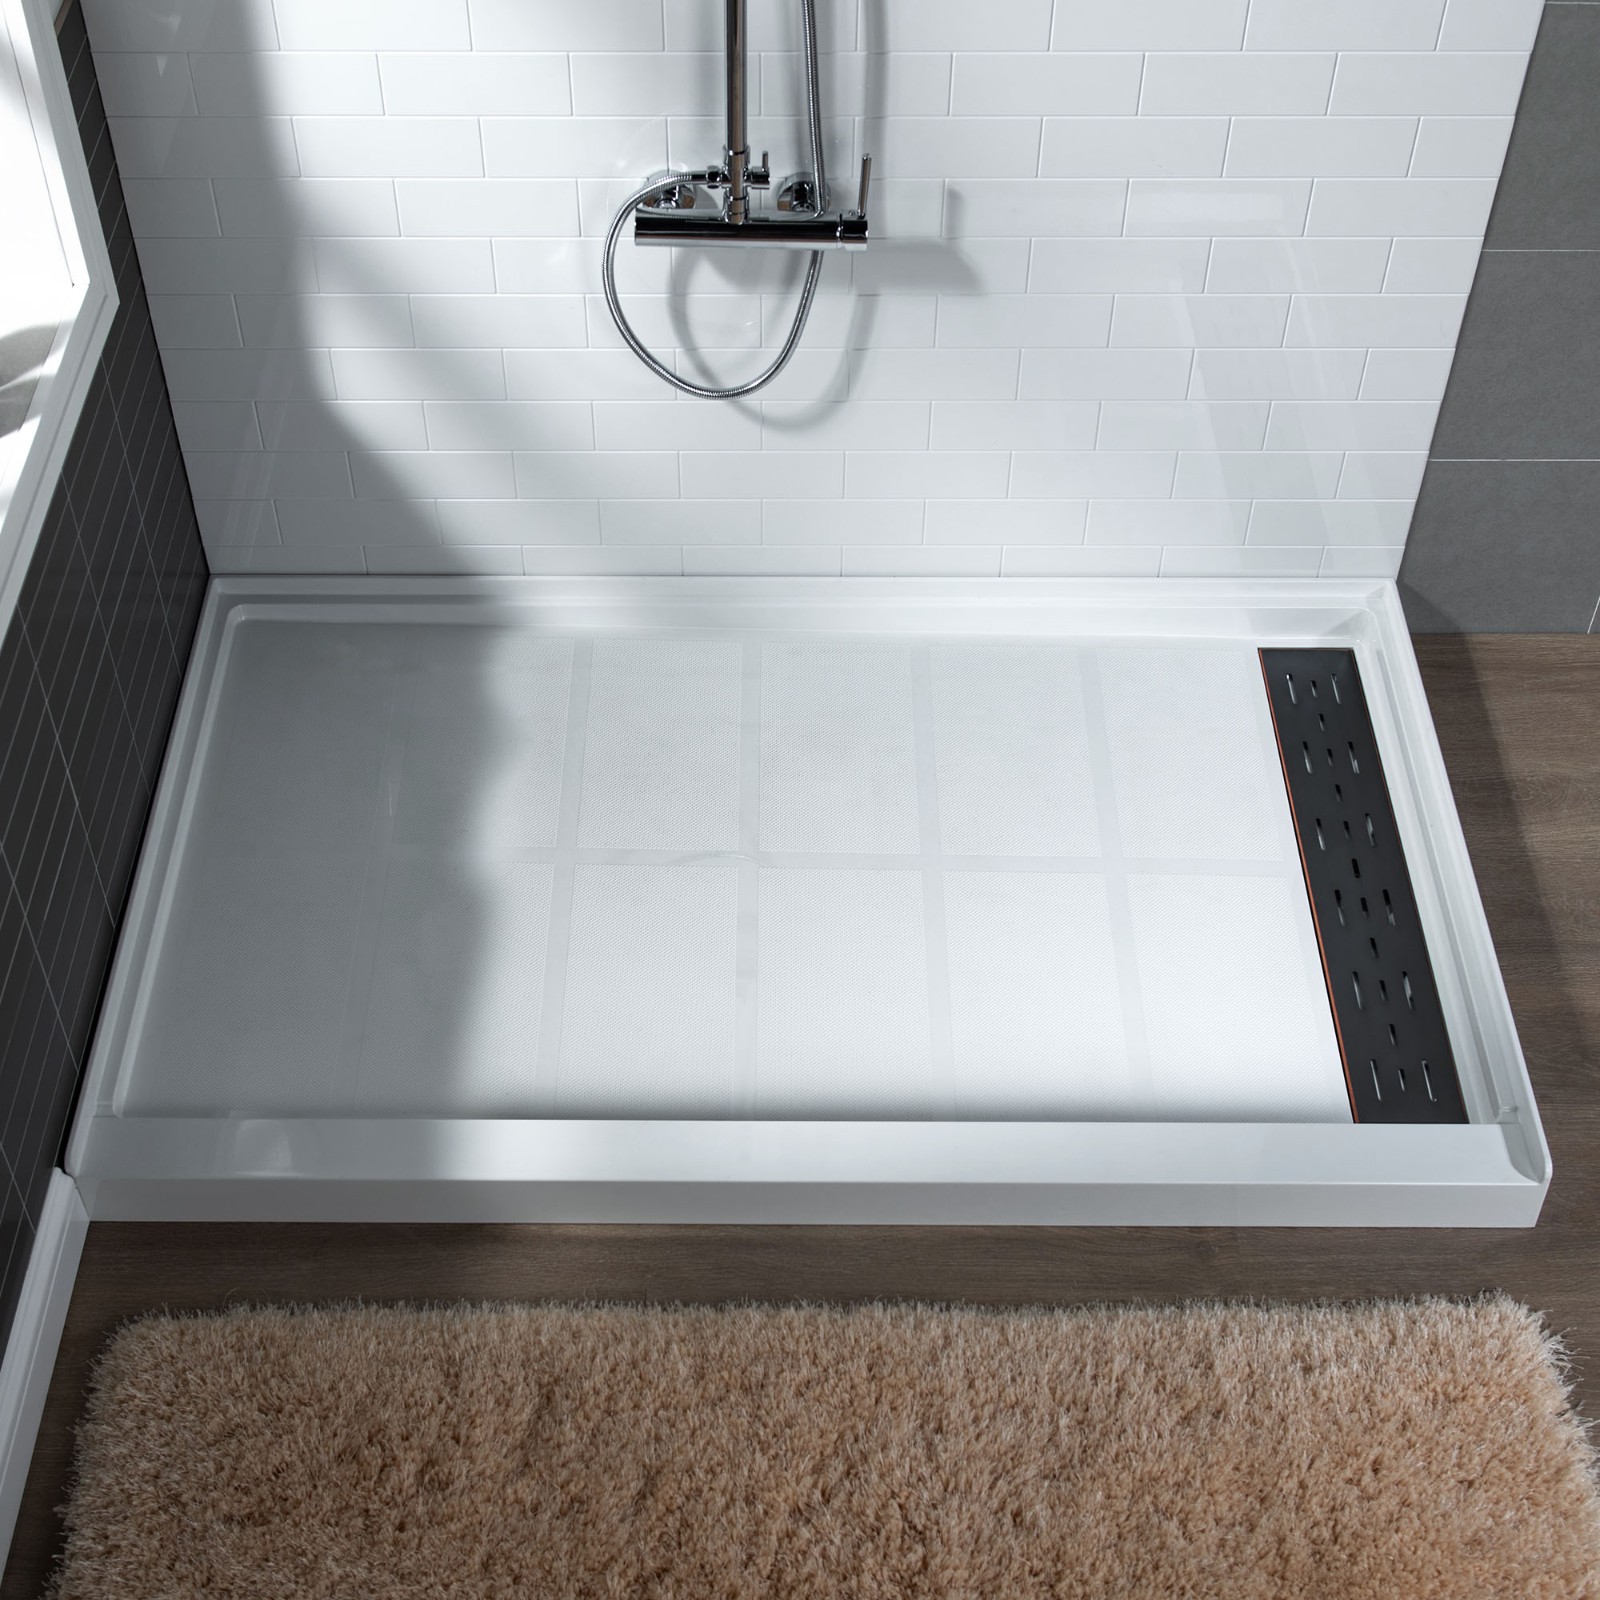  WOODBRIDGE SBR4832-1000R-ORB SolidSurface Shower Base with Recessed Trench Side Including Oil Rubbed Bronze Linear Cover, 48